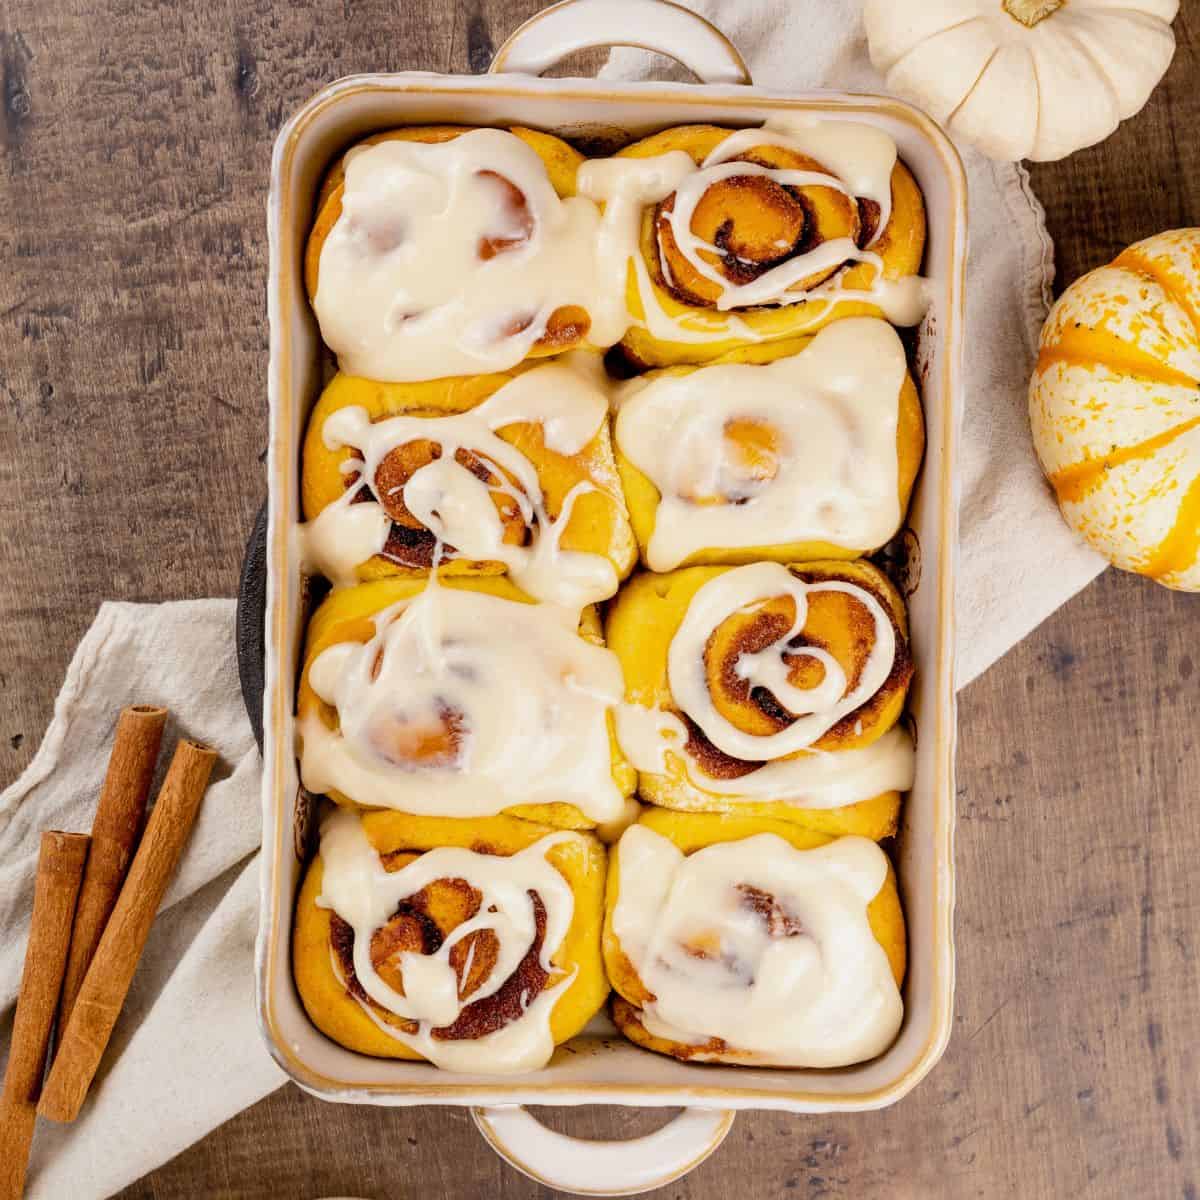 looking down on 8 pumpkin cinnamon rolls with icing on top. small pumpkins and cinnamon sticks are next to the baking dish.